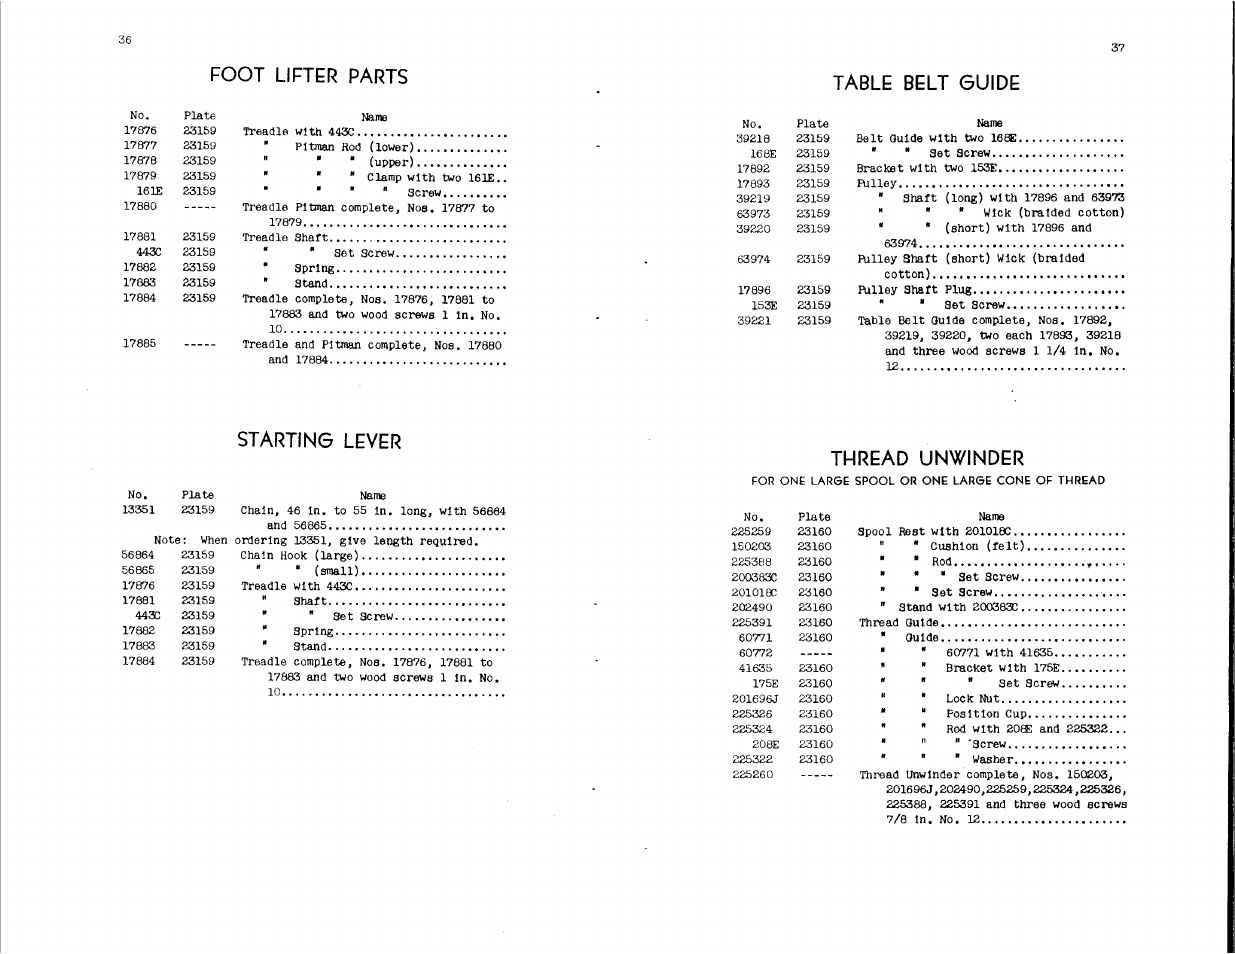 Foot lifter parts, Starting lever, Table belt guide | Thread unwinder | SINGER 114-34 User Manual | Page 19 / 43